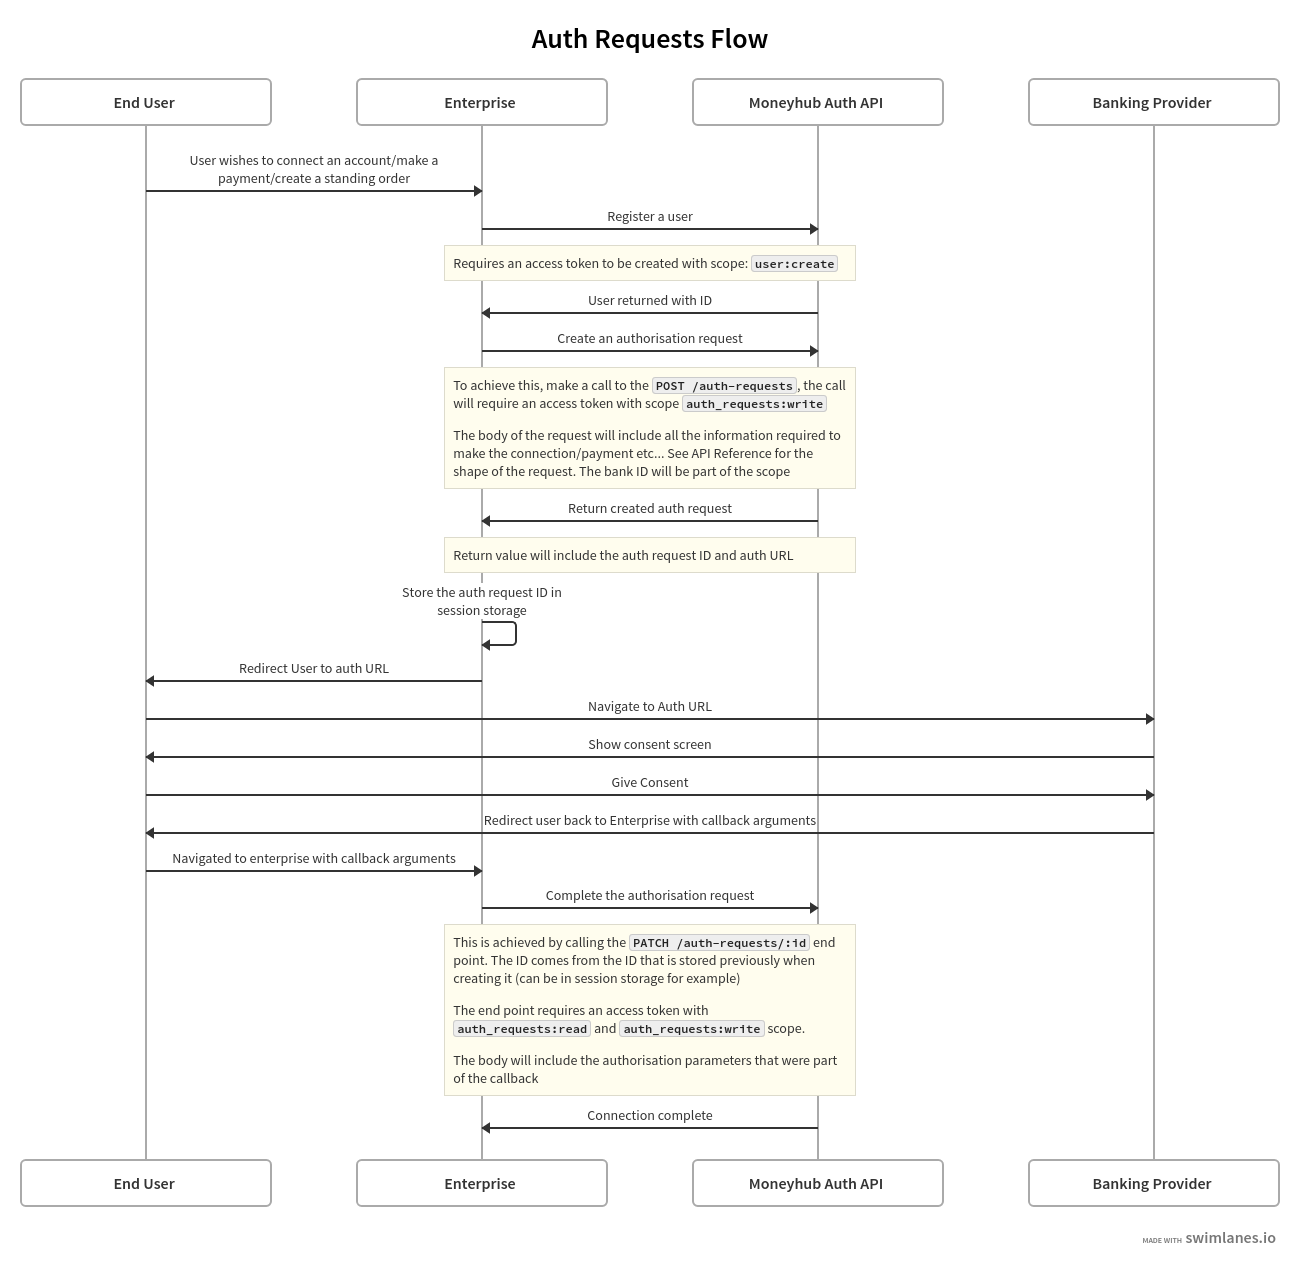 Sequence diagram for Auth Requests